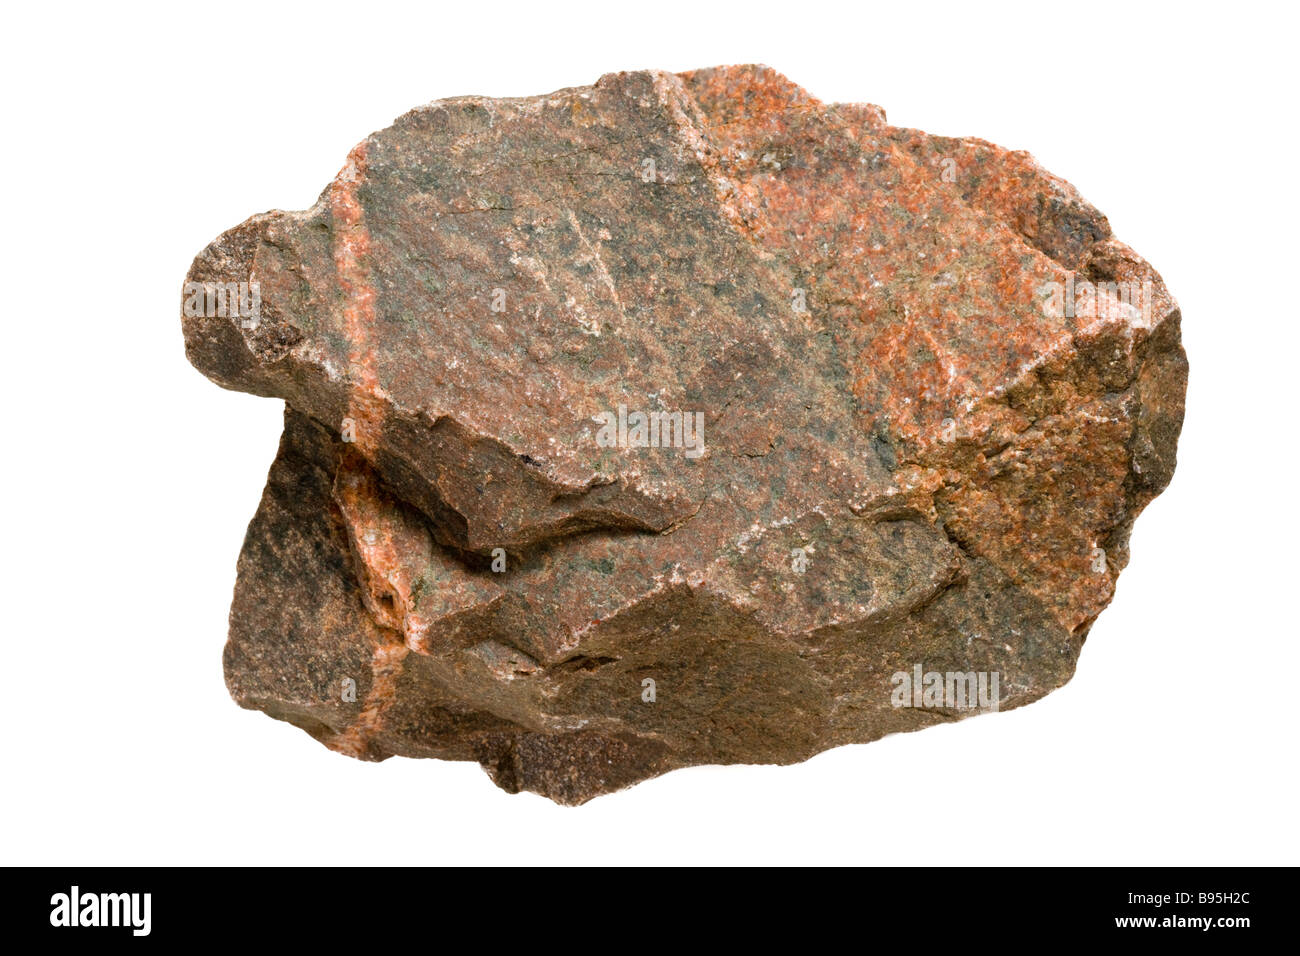 Rock, cut-out. Stock Photo